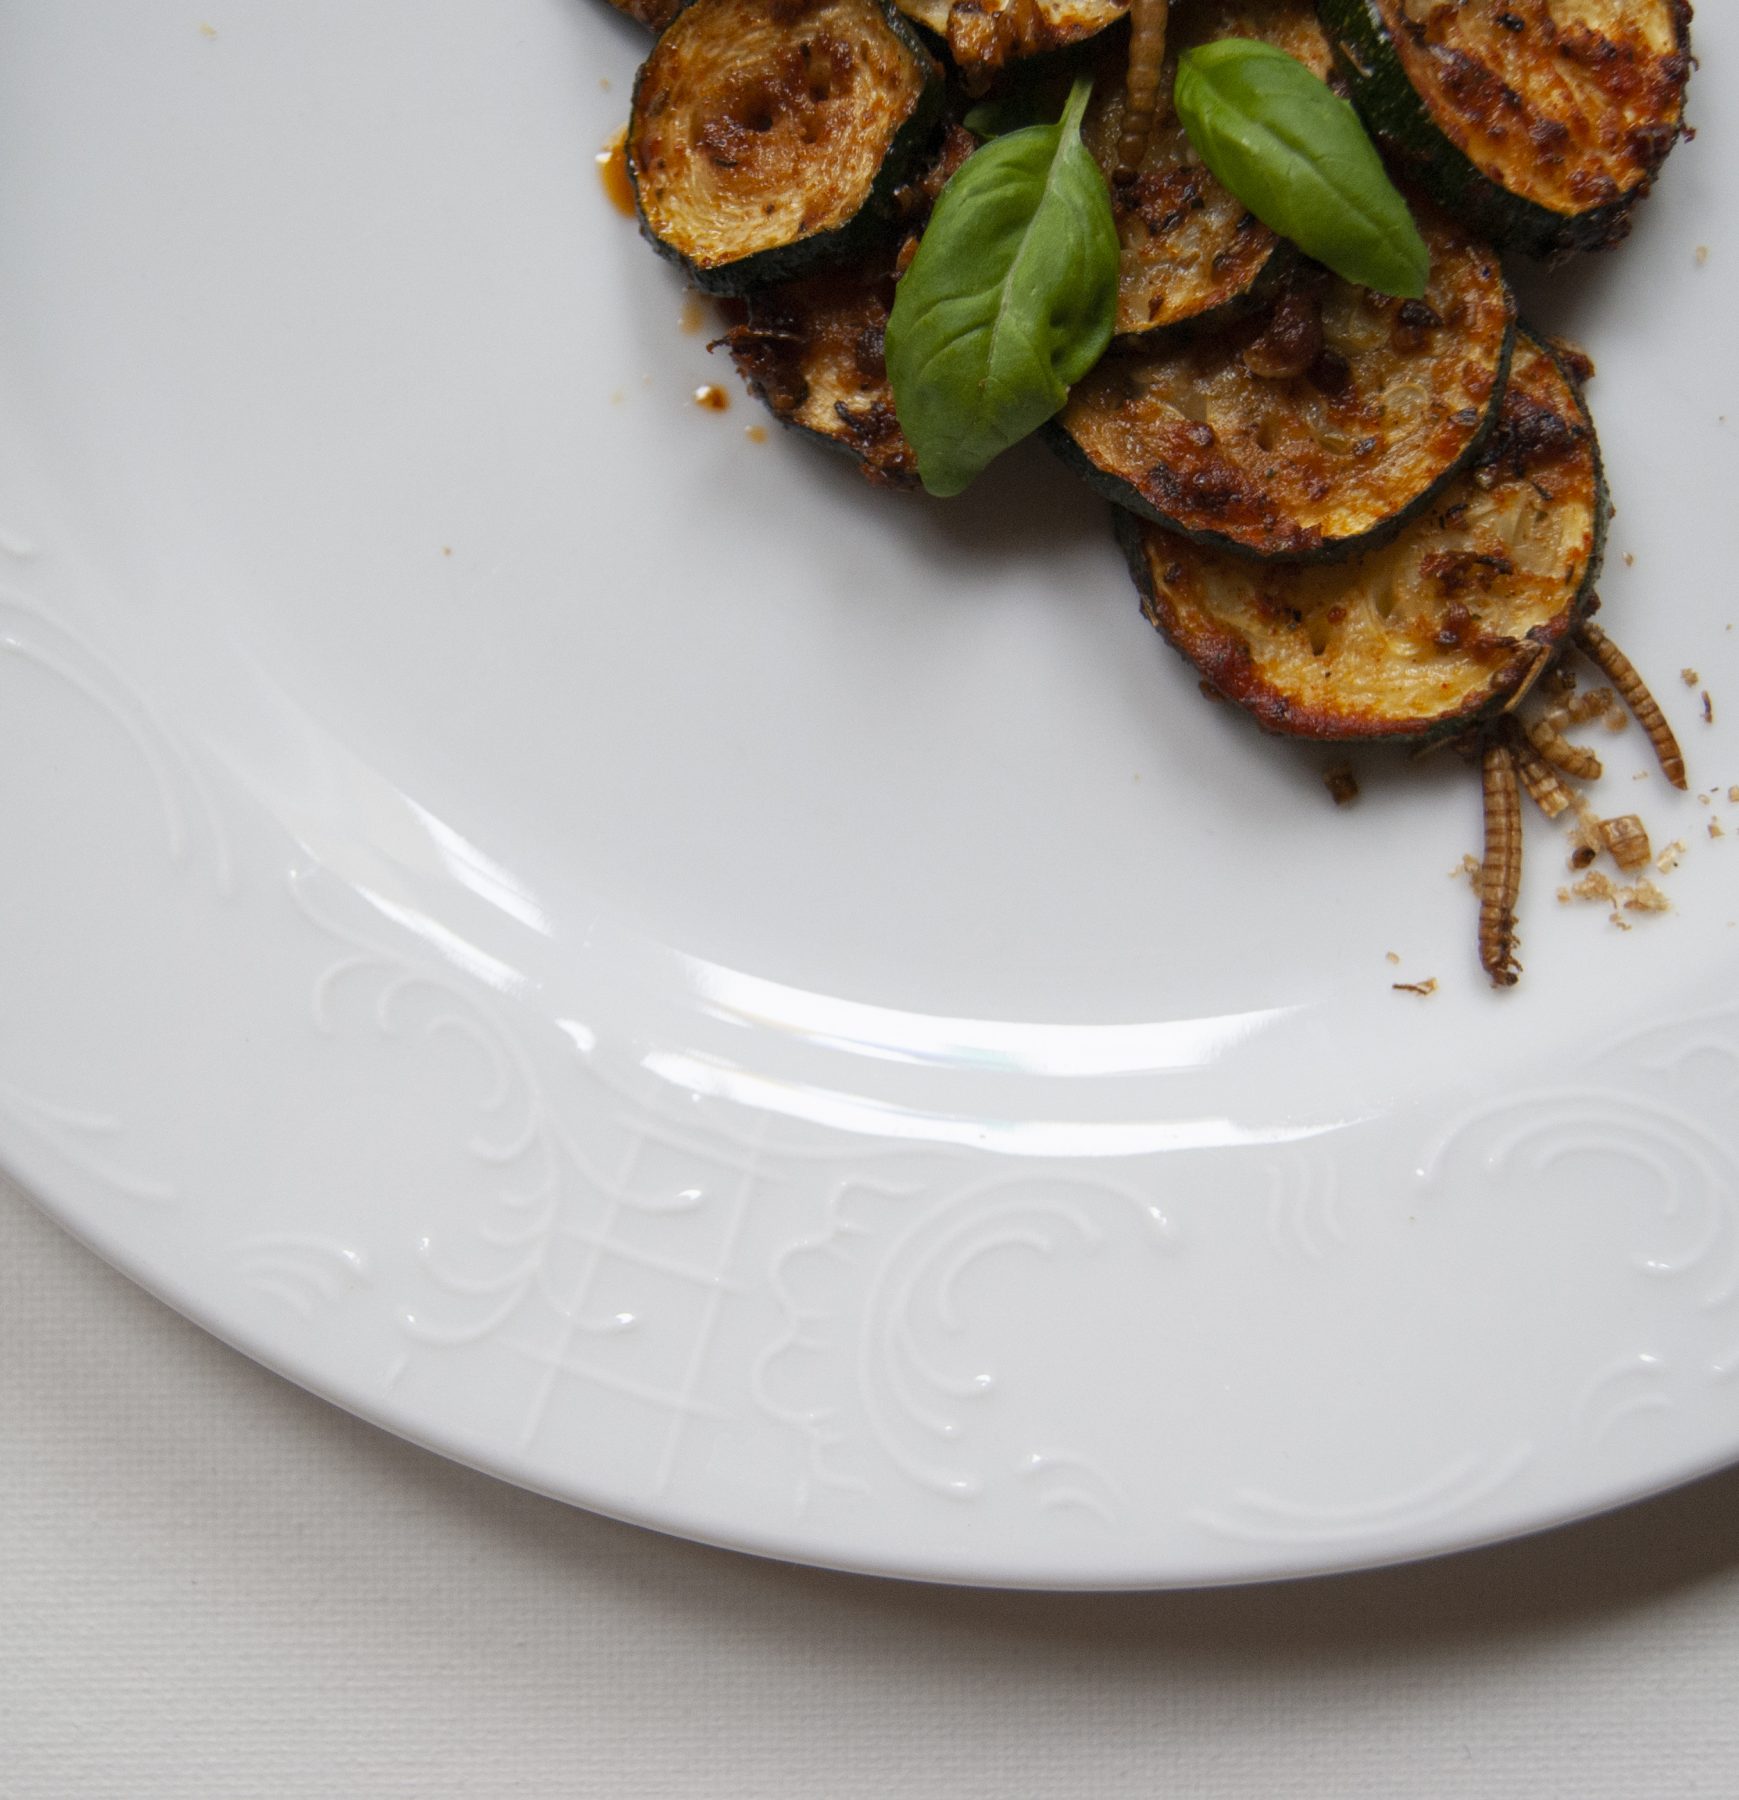 a dish with zucchini and insects on a white plate